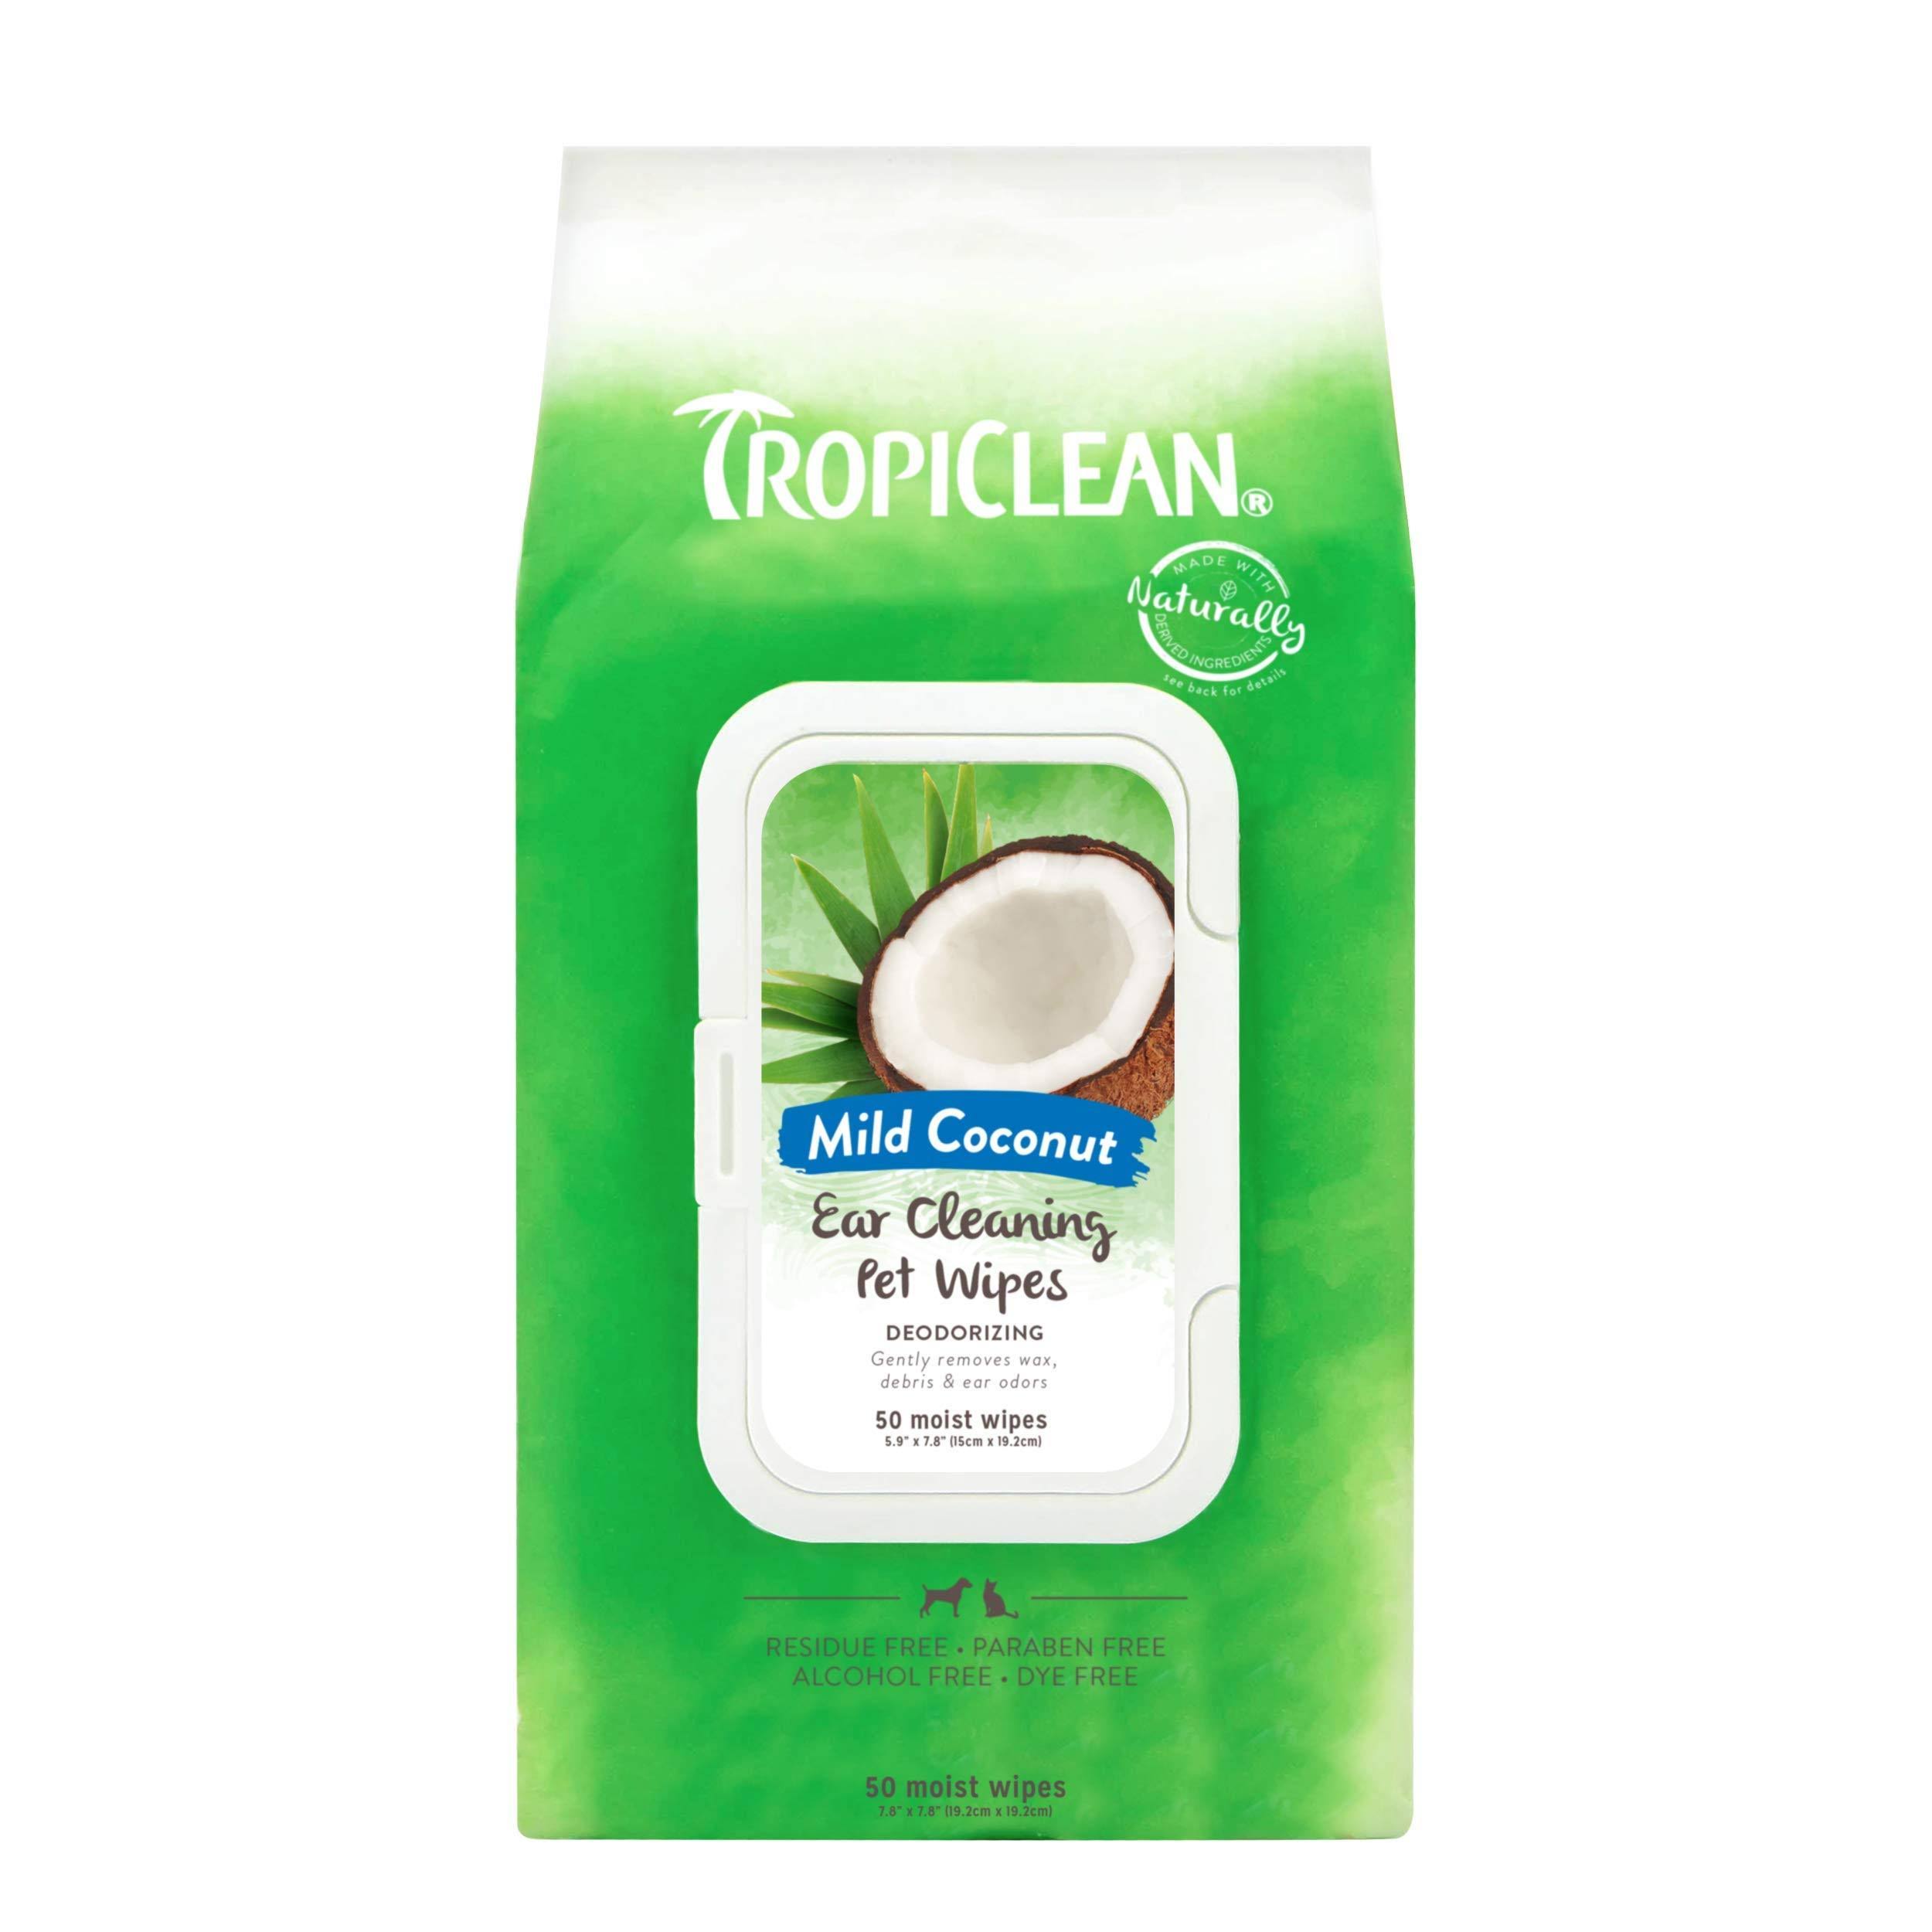 TropiClean Ear Cleaning Dog Wipes - 50 Count